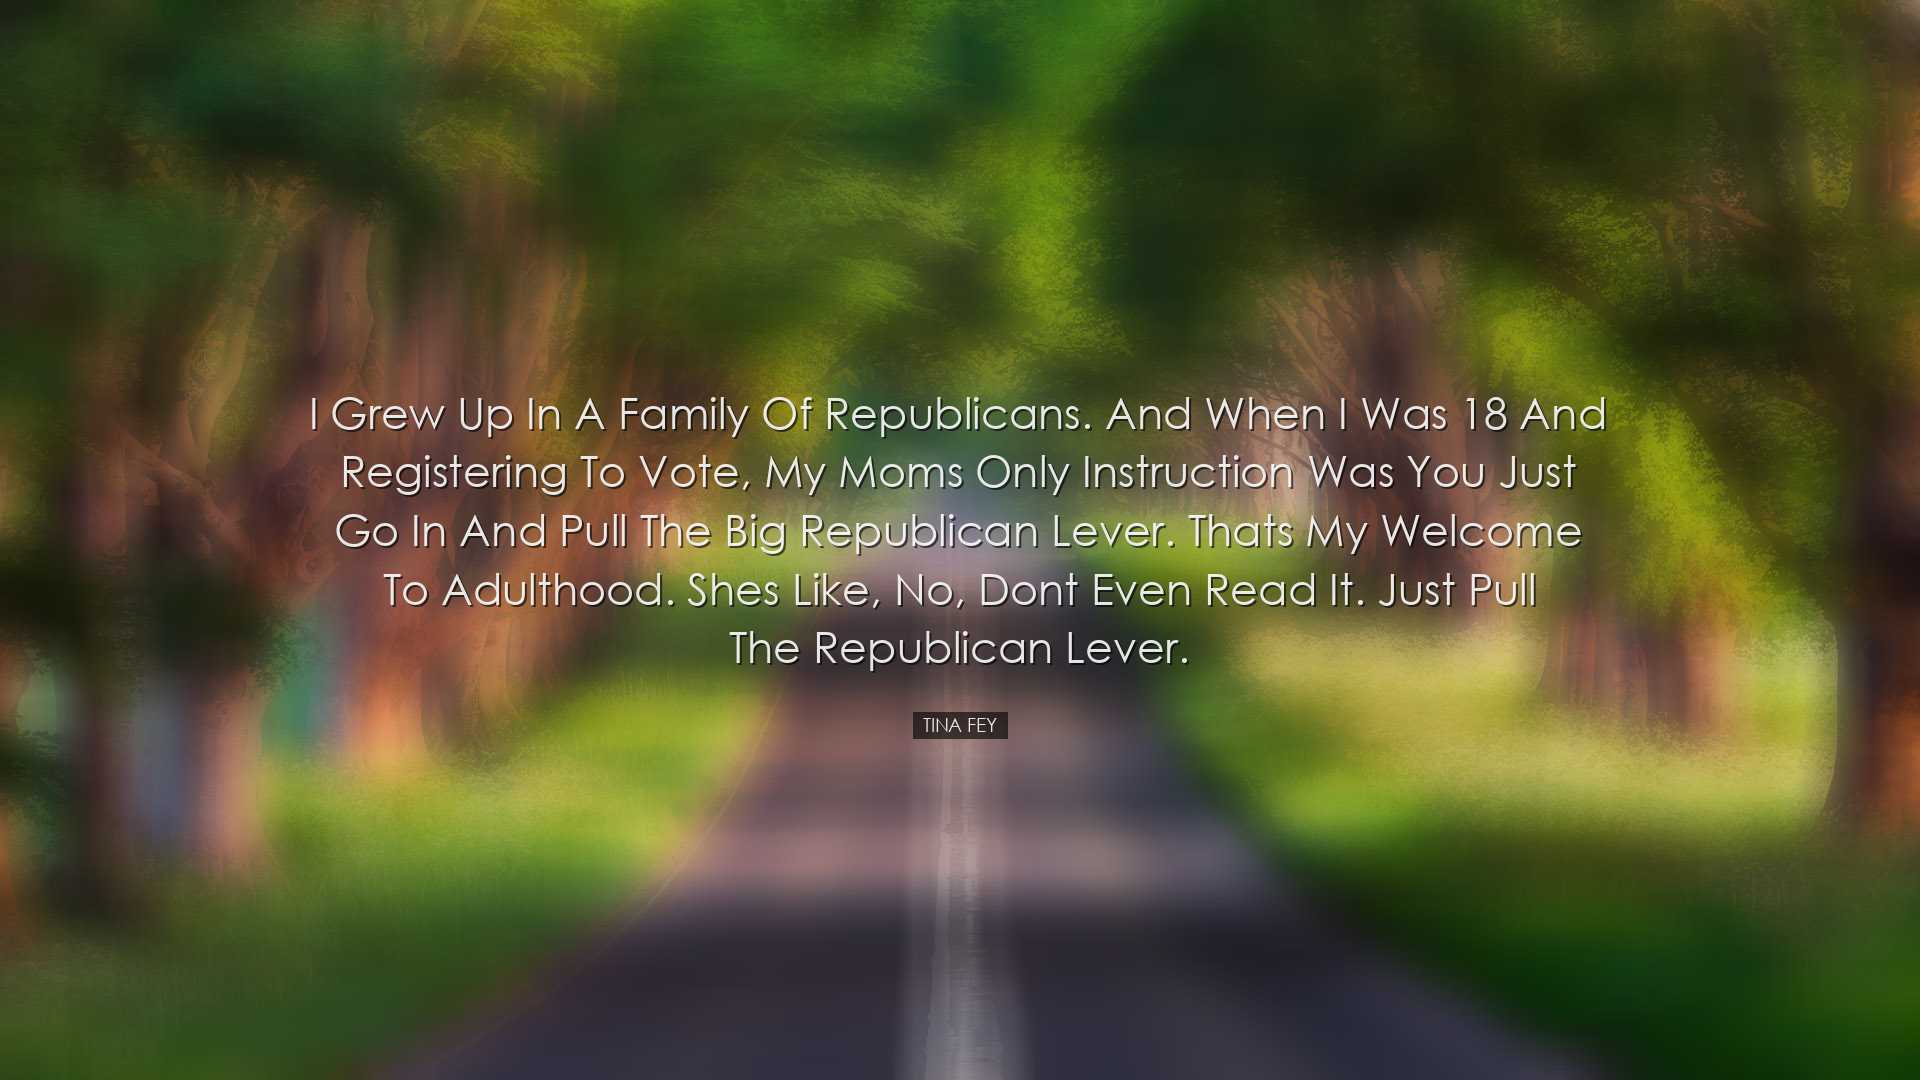 I grew up in a family of Republicans. And when I was 18 and regist